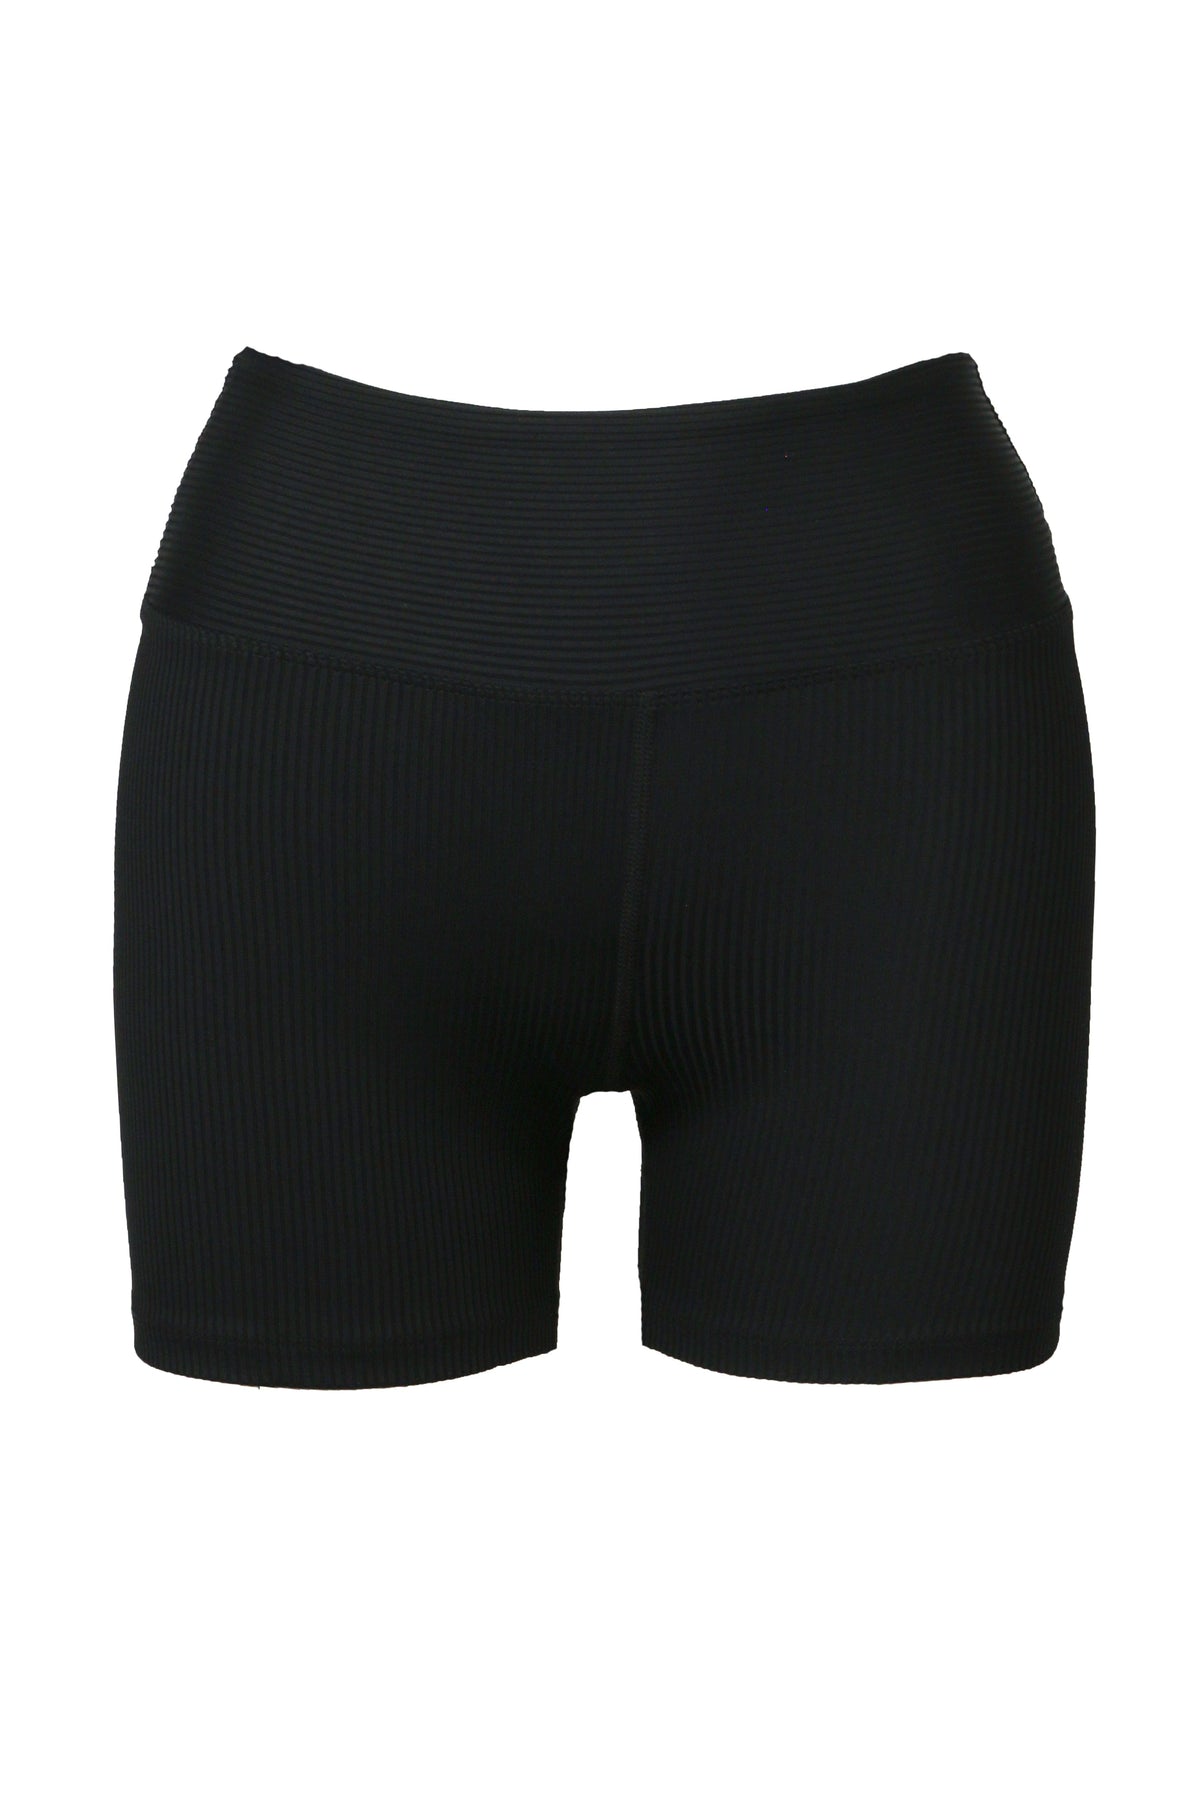 Year of Ours Activewear Black / S Volley Short- Black